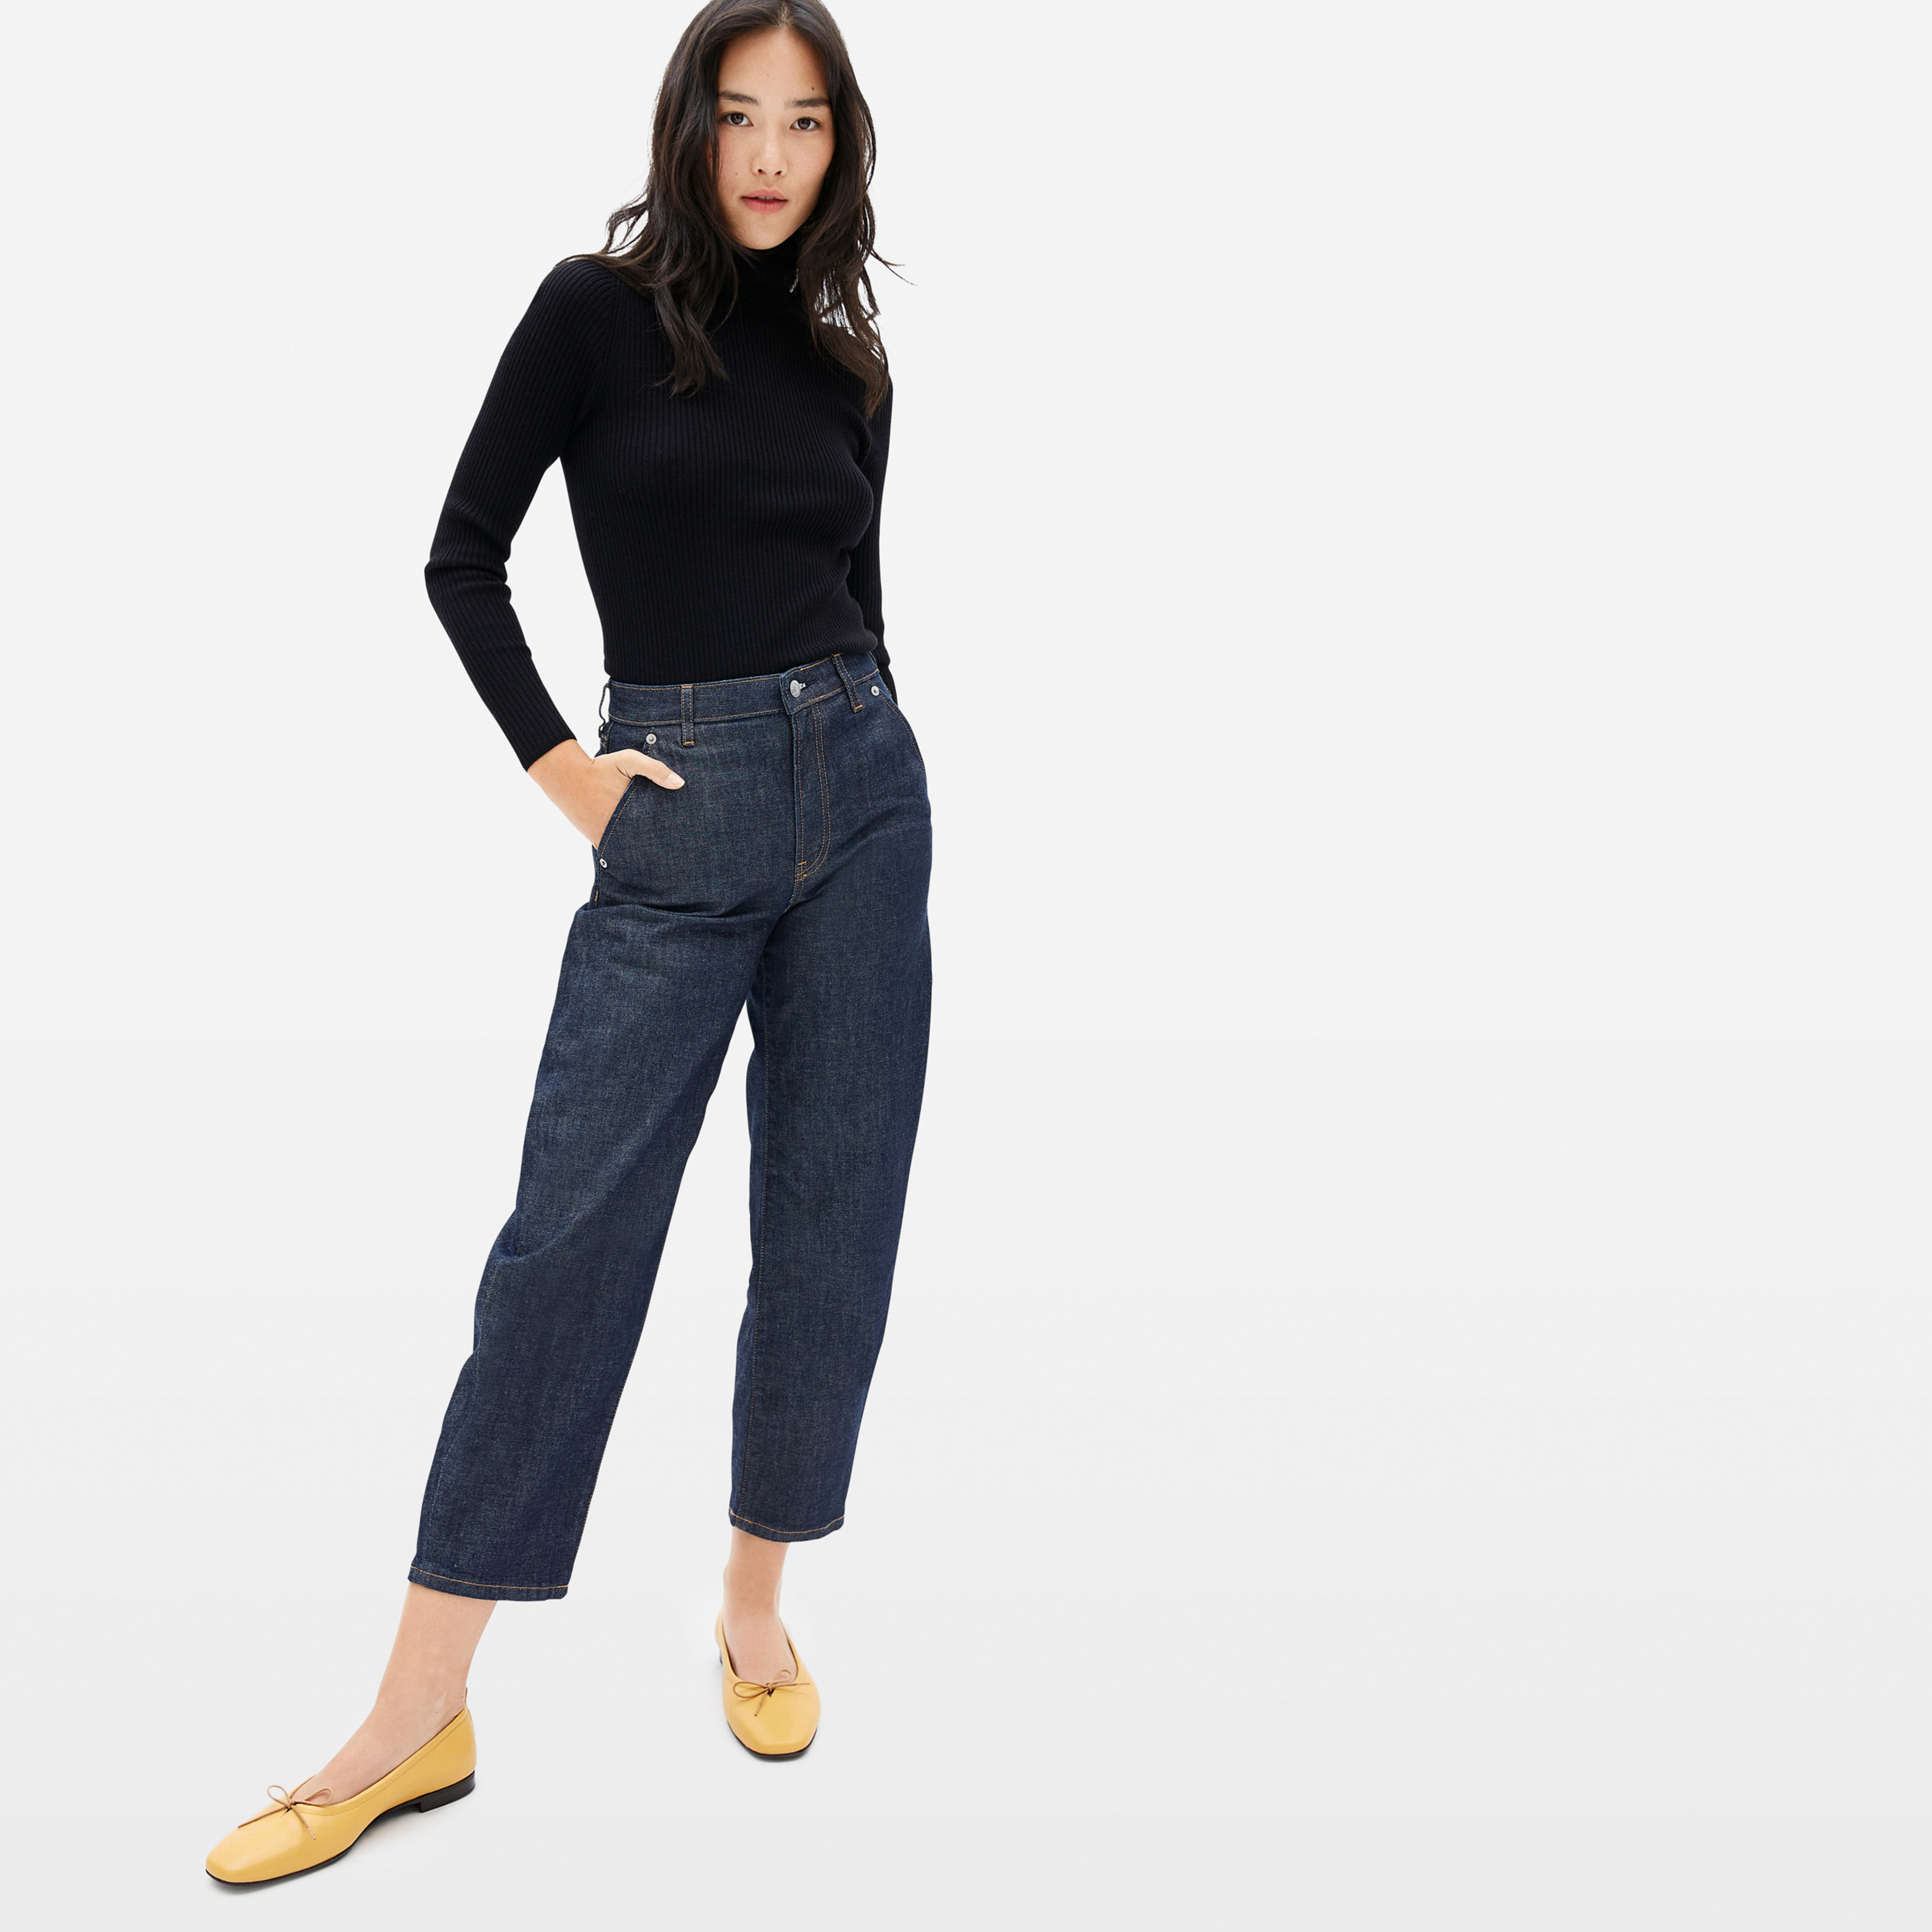 The Day Ballet Flat Wheat – Everlane